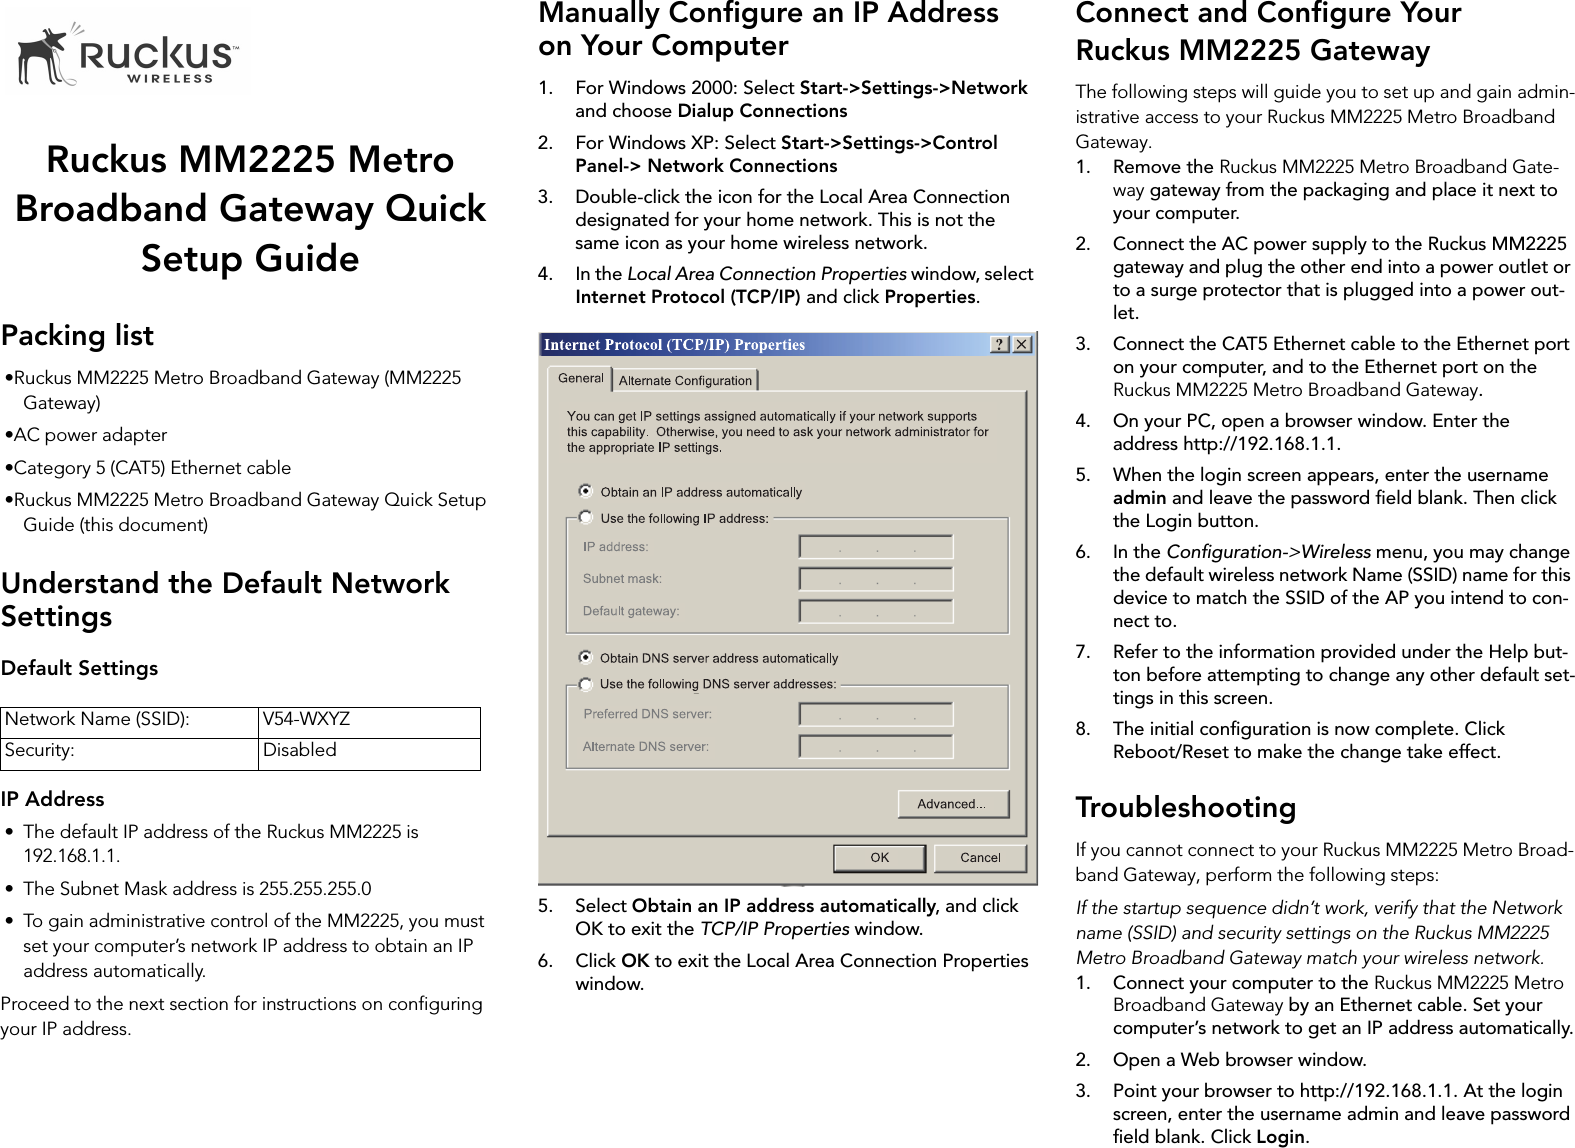 Ruckus MM2225 Metro Broadband Gateway Quick Setup GuidePacking list•Ruckus MM2225 Metro Broadband Gateway (MM2225 Gateway)•AC power adapter•Category 5 (CAT5) Ethernet cable•Ruckus MM2225 Metro Broadband Gateway Quick Setup Guide (this document)Understand the Default Network SettingsDefault SettingsIP Address• The default IP address of the Ruckus MM2225 is 192.168.1.1.• The Subnet Mask address is 255.255.255.0• To gain administrative control of the MM2225, you must set your computer’s network IP address to obtain an IP address automatically.Proceed to the next section for instructions on configuring your IP address.Manually Configure an IP Address on Your Computer1. For Windows 2000: Select Start-&gt;Settings-&gt;Network and choose Dialup Connections2. For Windows XP: Select Start-&gt;Settings-&gt;Control Panel-&gt; Network Connections3. Double-click the icon for the Local Area Connection designated for your home network. This is not the same icon as your home wireless network.4. In the Local Area Connection Properties window, select Internet Protocol (TCP/IP) and click Properties.5. Select Obtain an IP address automatically, and click OK to exit the TCP/IP Properties window.6. Click OK to exit the Local Area Connection Properties window.Connect and Configure Your Ruckus MM2225 GatewayThe following steps will guide you to set up and gain admin-istrative access to your Ruckus MM2225 Metro Broadband Gateway.1. Remove the Ruckus MM2225 Metro Broadband Gate-way gateway from the packaging and place it next to your computer.2. Connect the AC power supply to the Ruckus MM2225 gateway and plug the other end into a power outlet or to a surge protector that is plugged into a power out-let.3. Connect the CAT5 Ethernet cable to the Ethernet port on your computer, and to the Ethernet port on the Ruckus MM2225 Metro Broadband Gateway.4. On your PC, open a browser window. Enter the address http://192.168.1.1.5. When the login screen appears, enter the username admin and leave the password field blank. Then click the Login button.6. In the Configuration-&gt;Wireless menu, you may change the default wireless network Name (SSID) name for this device to match the SSID of the AP you intend to con-nect to.7. Refer to the information provided under the Help but-ton before attempting to change any other default set-tings in this screen. 8. The initial configuration is now complete. Click Reboot/Reset to make the change take effect.TroubleshootingIf you cannot connect to your Ruckus MM2225 Metro Broad-band Gateway, perform the following steps:If the startup sequence didn’t work, verify that the Network name (SSID) and security settings on the Ruckus MM2225 Metro Broadband Gateway match your wireless network.1. Connect your computer to the Ruckus MM2225 Metro Broadband Gateway by an Ethernet cable. Set your computer’s network to get an IP address automatically.2. Open a Web browser window.3. Point your browser to http://192.168.1.1. At the login screen, enter the username admin and leave password field blank. Click Login.Network Name (SSID): V54-WXYZSecurity: Disabled